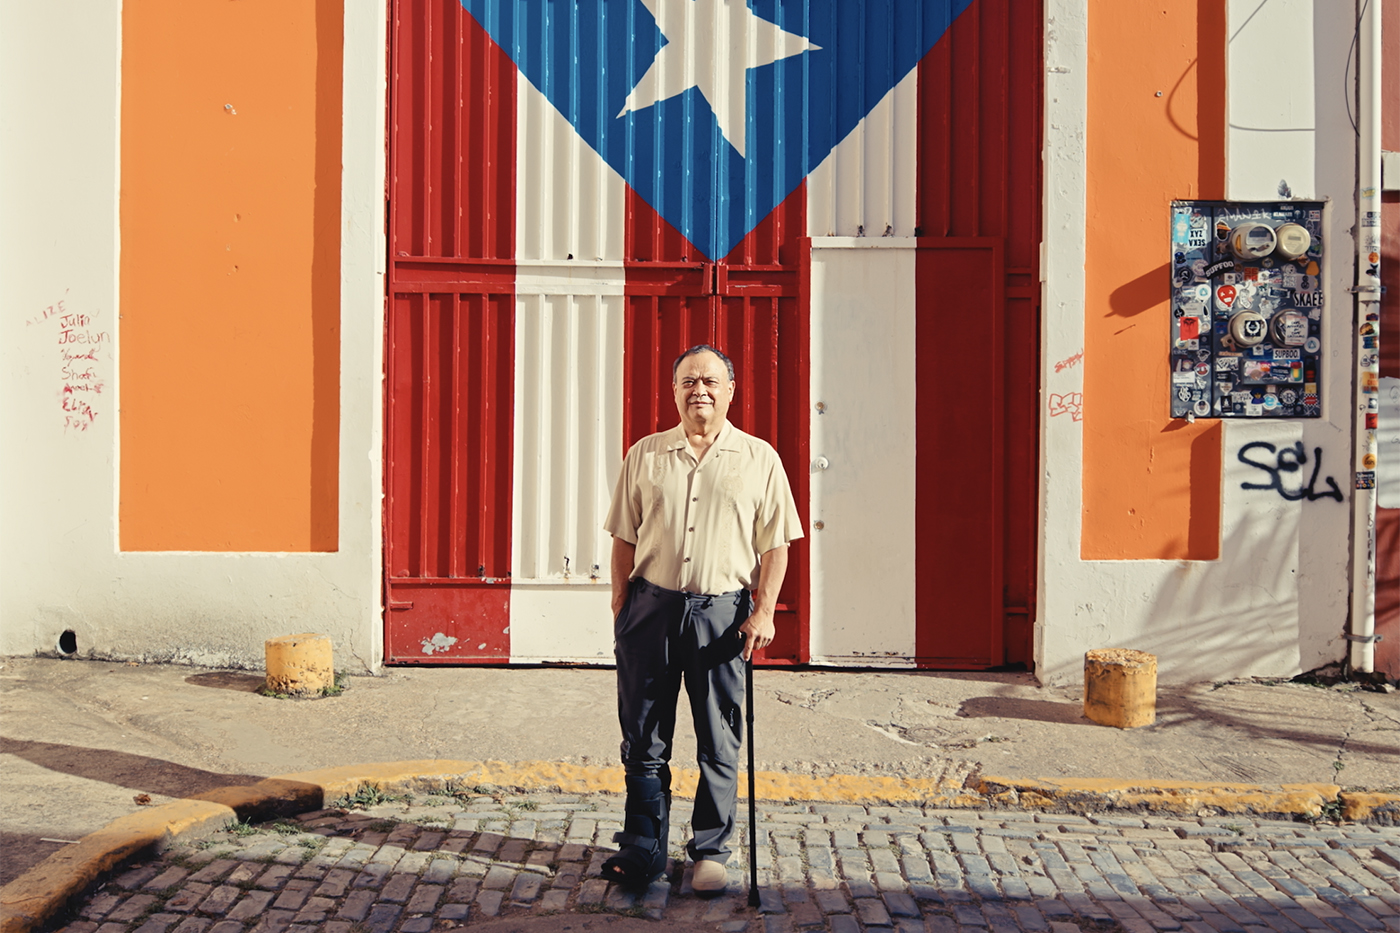 A person stands in front of the flag of Puerto Rico.